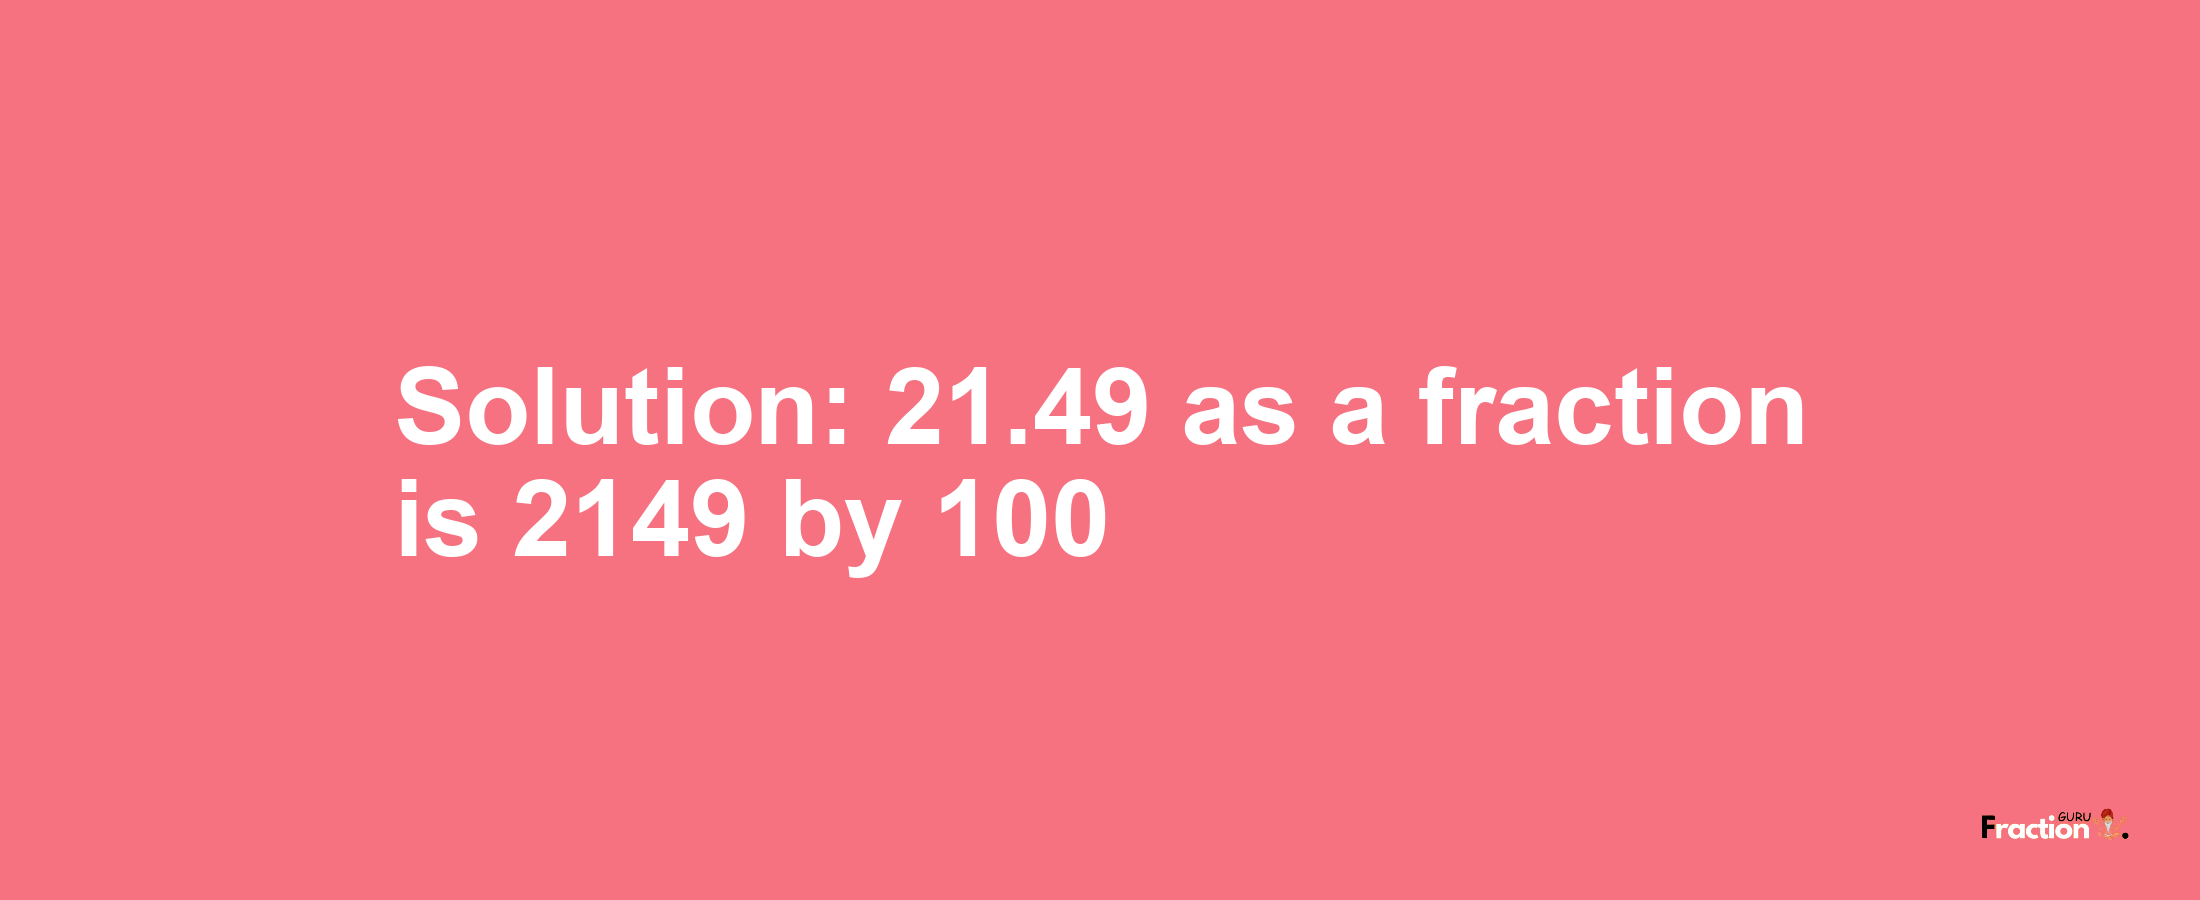 Solution:21.49 as a fraction is 2149/100